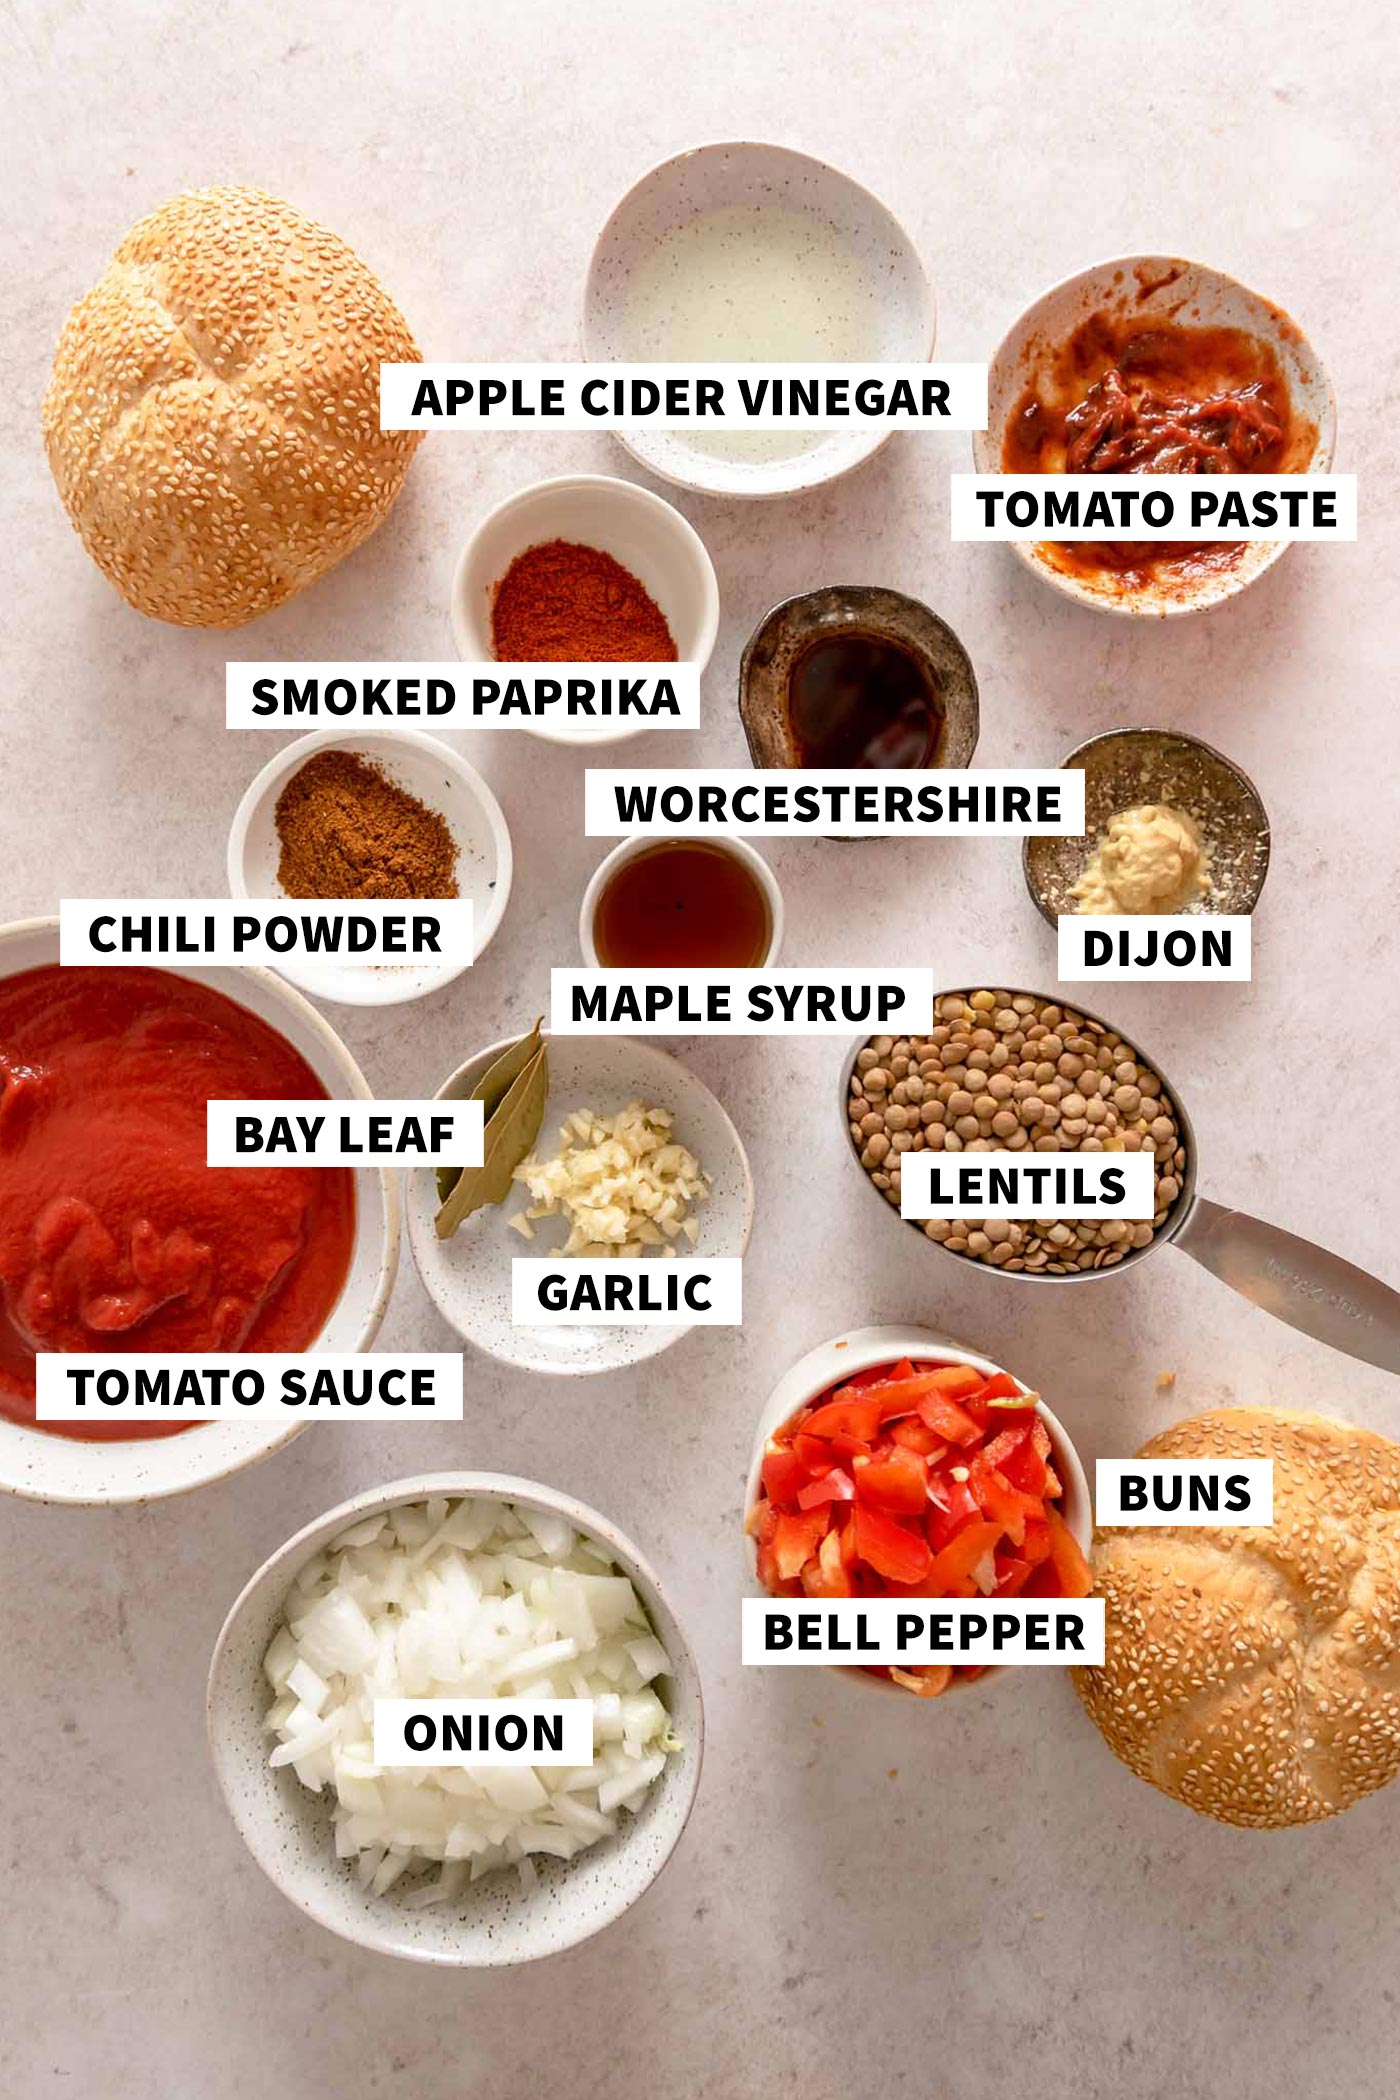 All the ingredients needed to make Vegan Sloppy Joe with Lentils and Tomato Sauce recipe.  Each element is labeled with text.